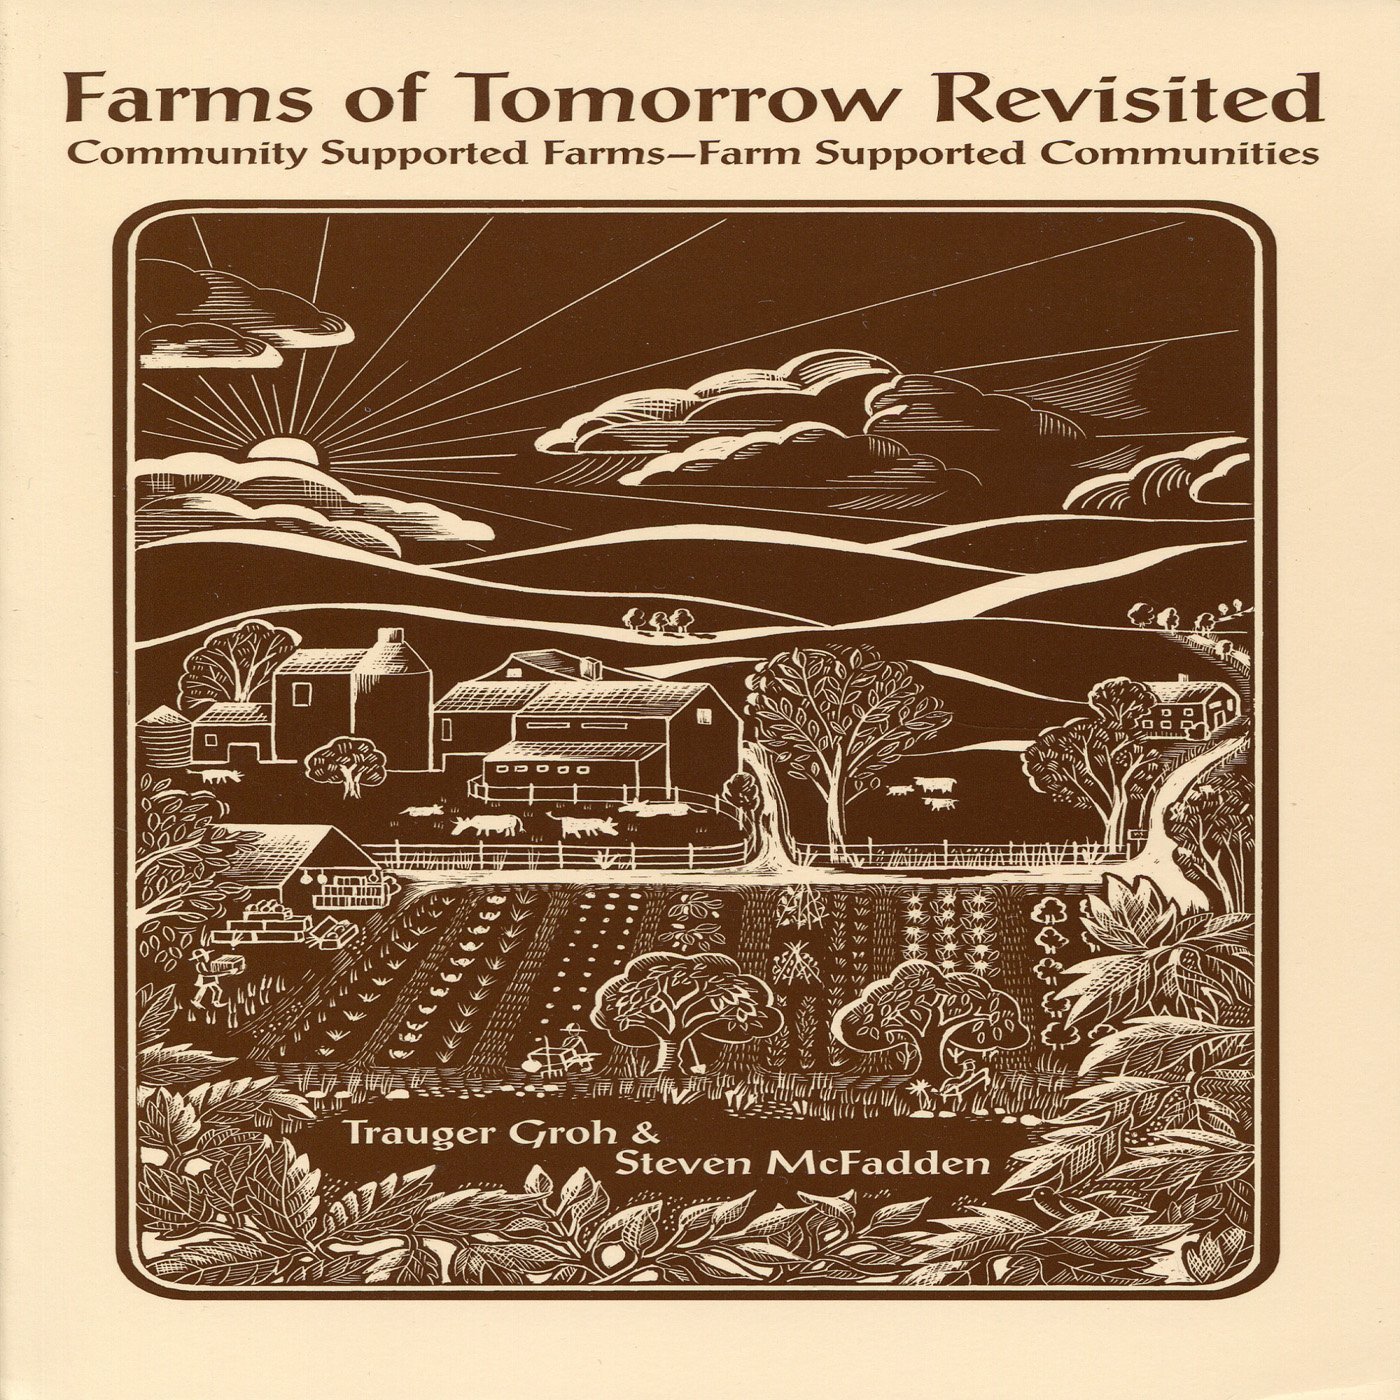 Farms of Tomorrow Revisited (Steven McFadden, Trauger Groh)